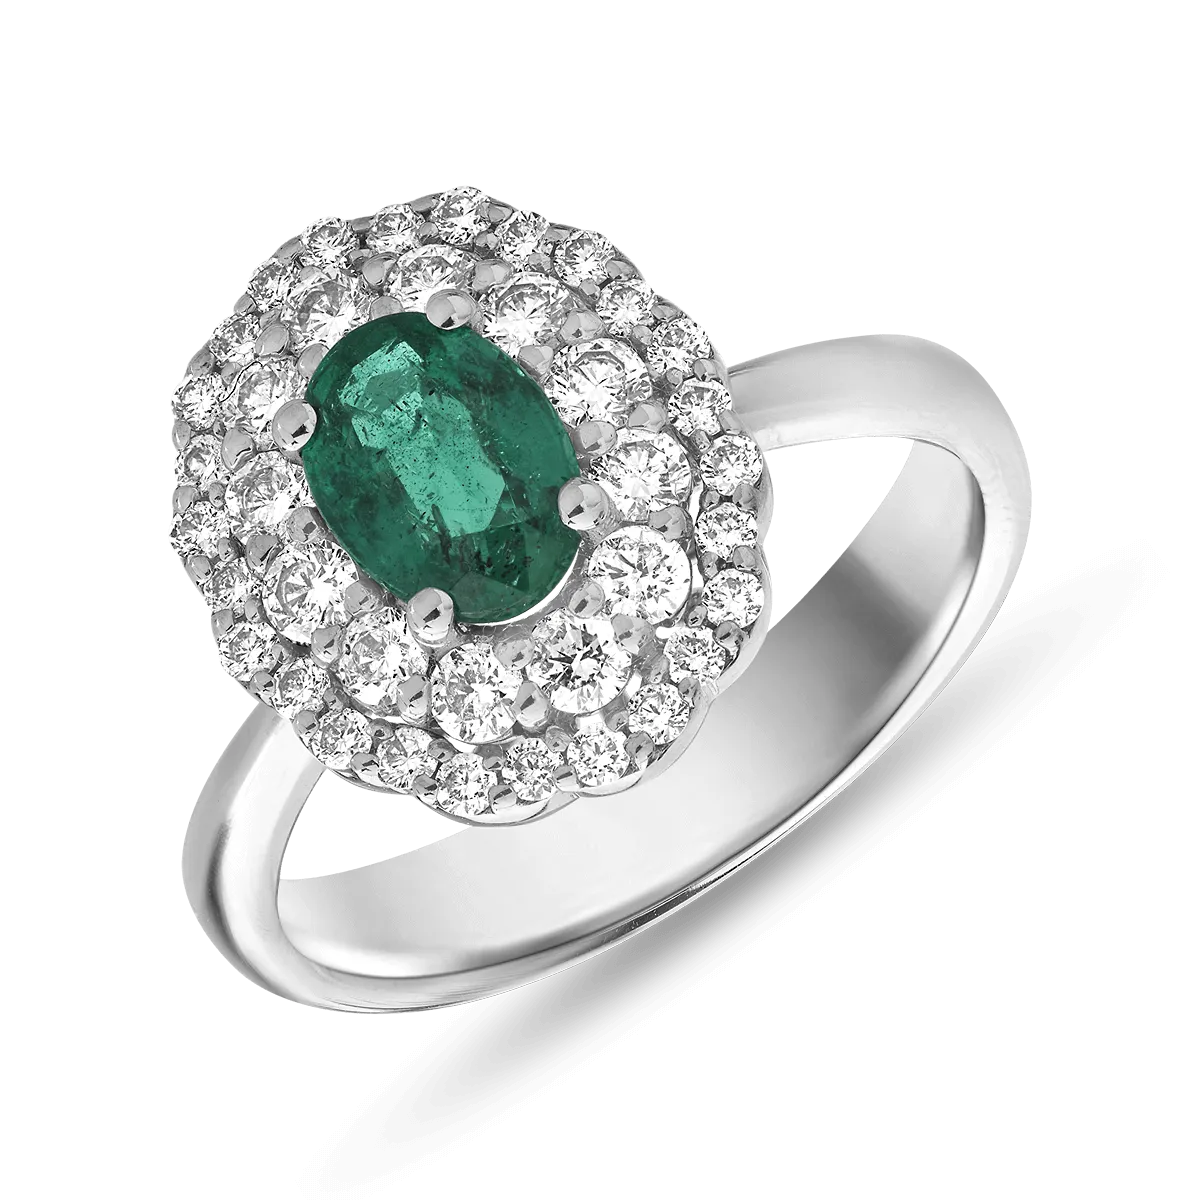 18K white gold ring with 0.66ct emerald and 0.56ct diamonds